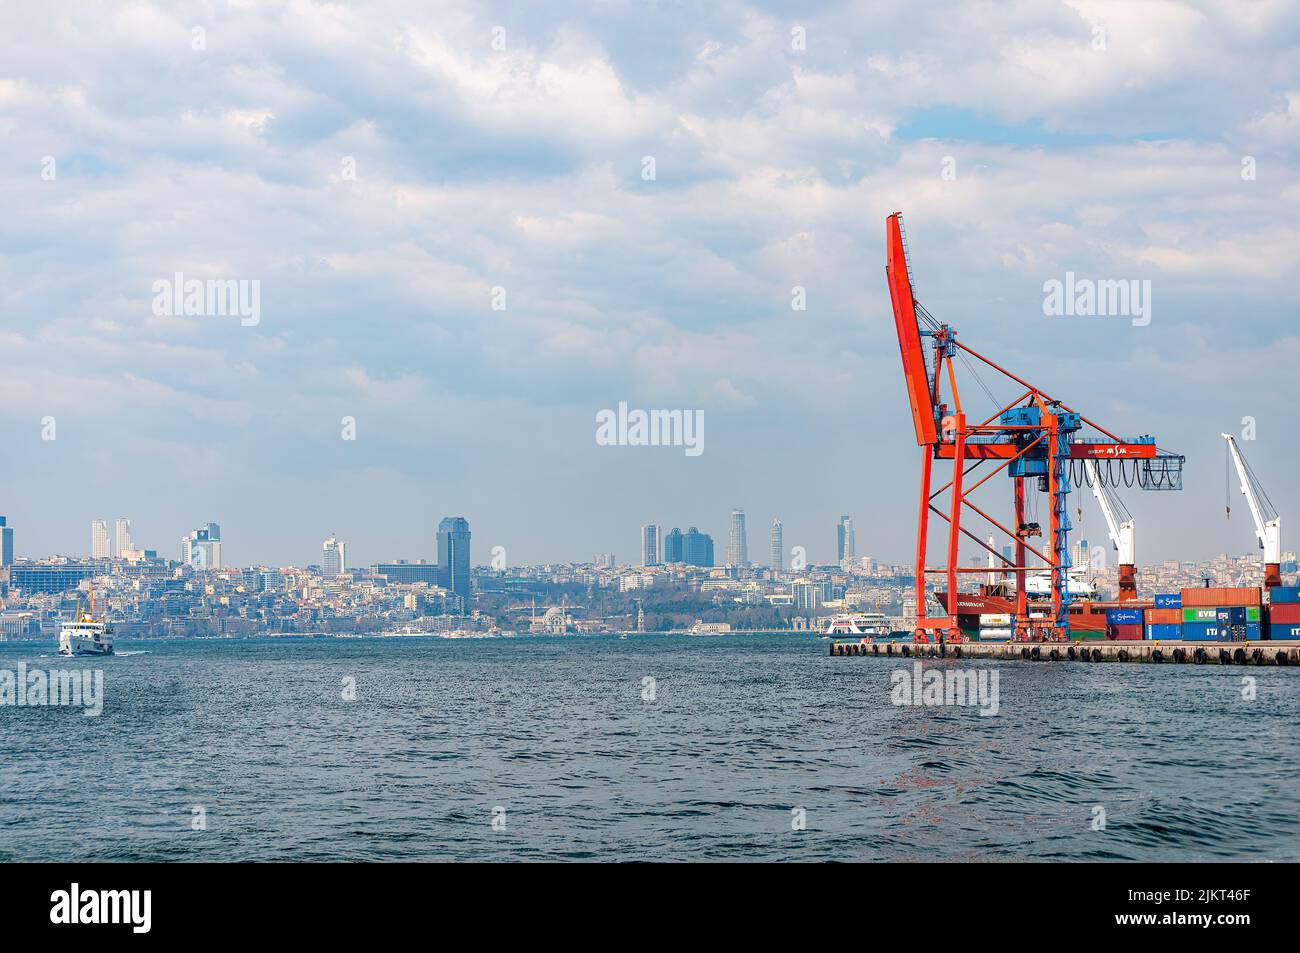 ISTANBUL, TURKEY - APRIL 09, 2011: The Port of Haydarpasa, also known as the Port of Haidar Pasha is a general cargo seaport. Stock Photo